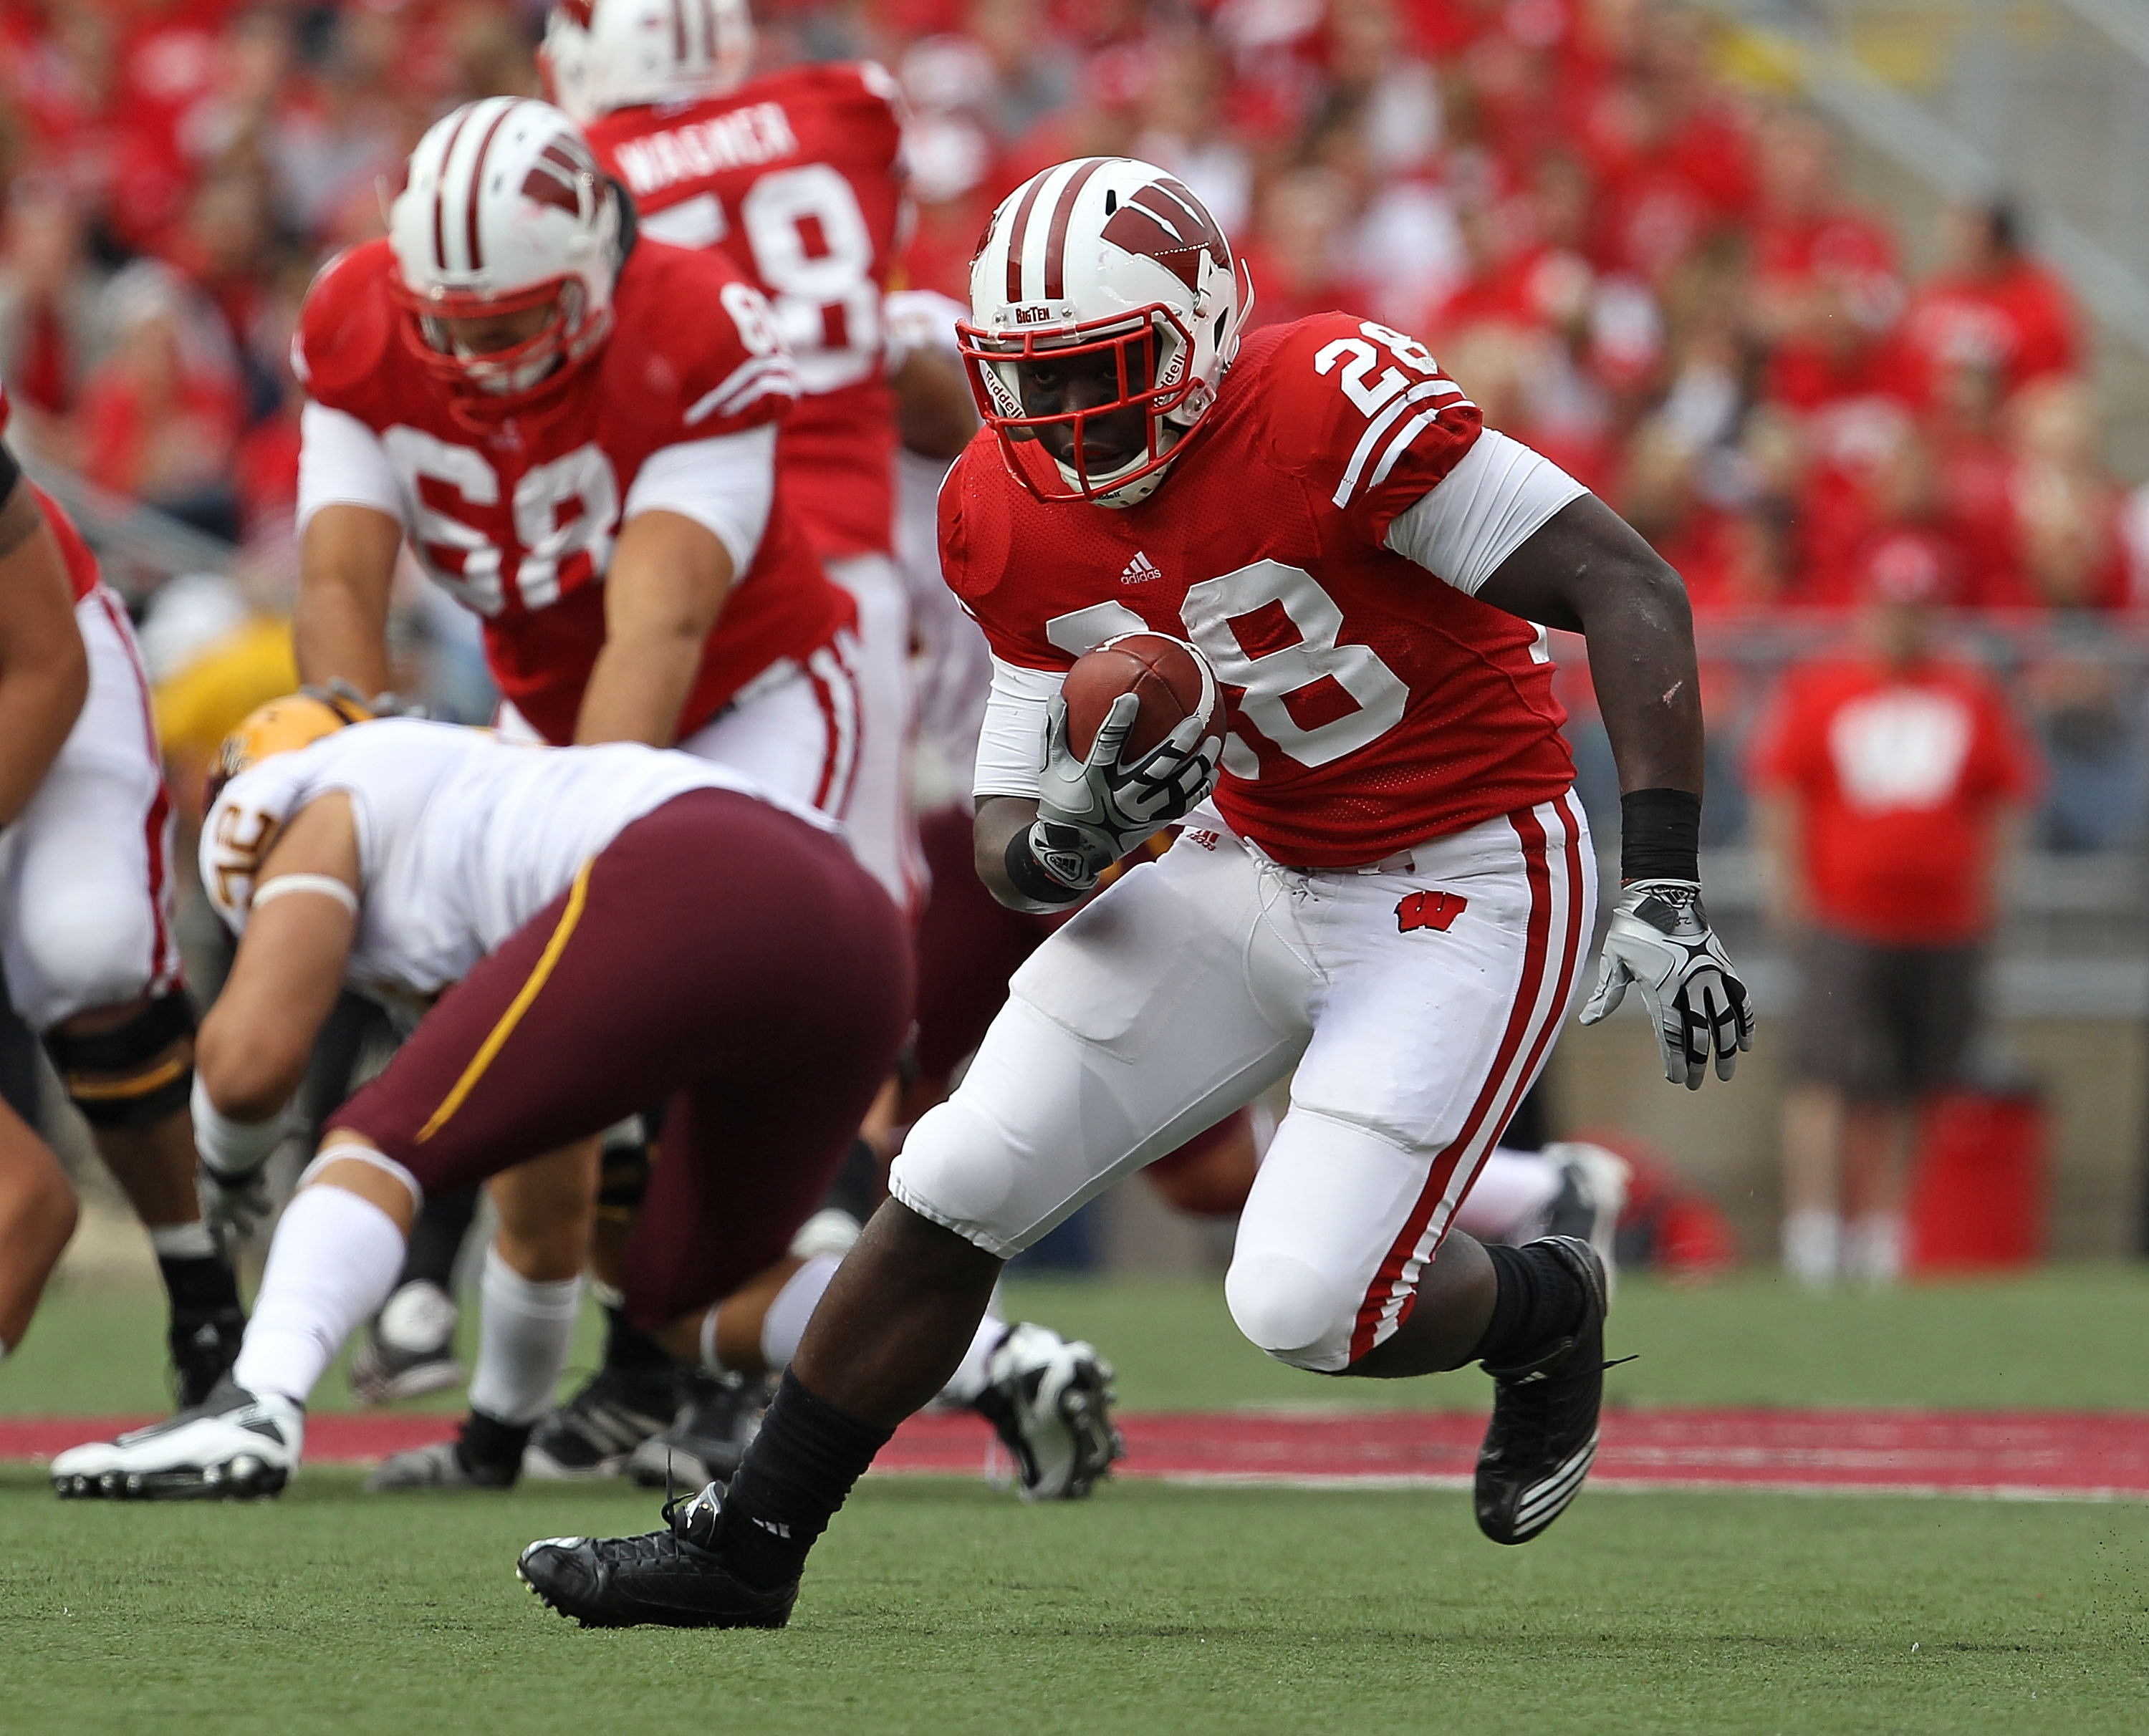 MADISON, WI - SEPTEMBER 18: Montee Ball #28 of the Wisconsin Badgers runs against the Arizona State Sun Devils at Camp Randall Stadium on September 18, 2010 in Madison, Wisconsin. Wisconsin defeated Arizona State 20-19. (Photo by Jonathan Daniel/Getty Ima